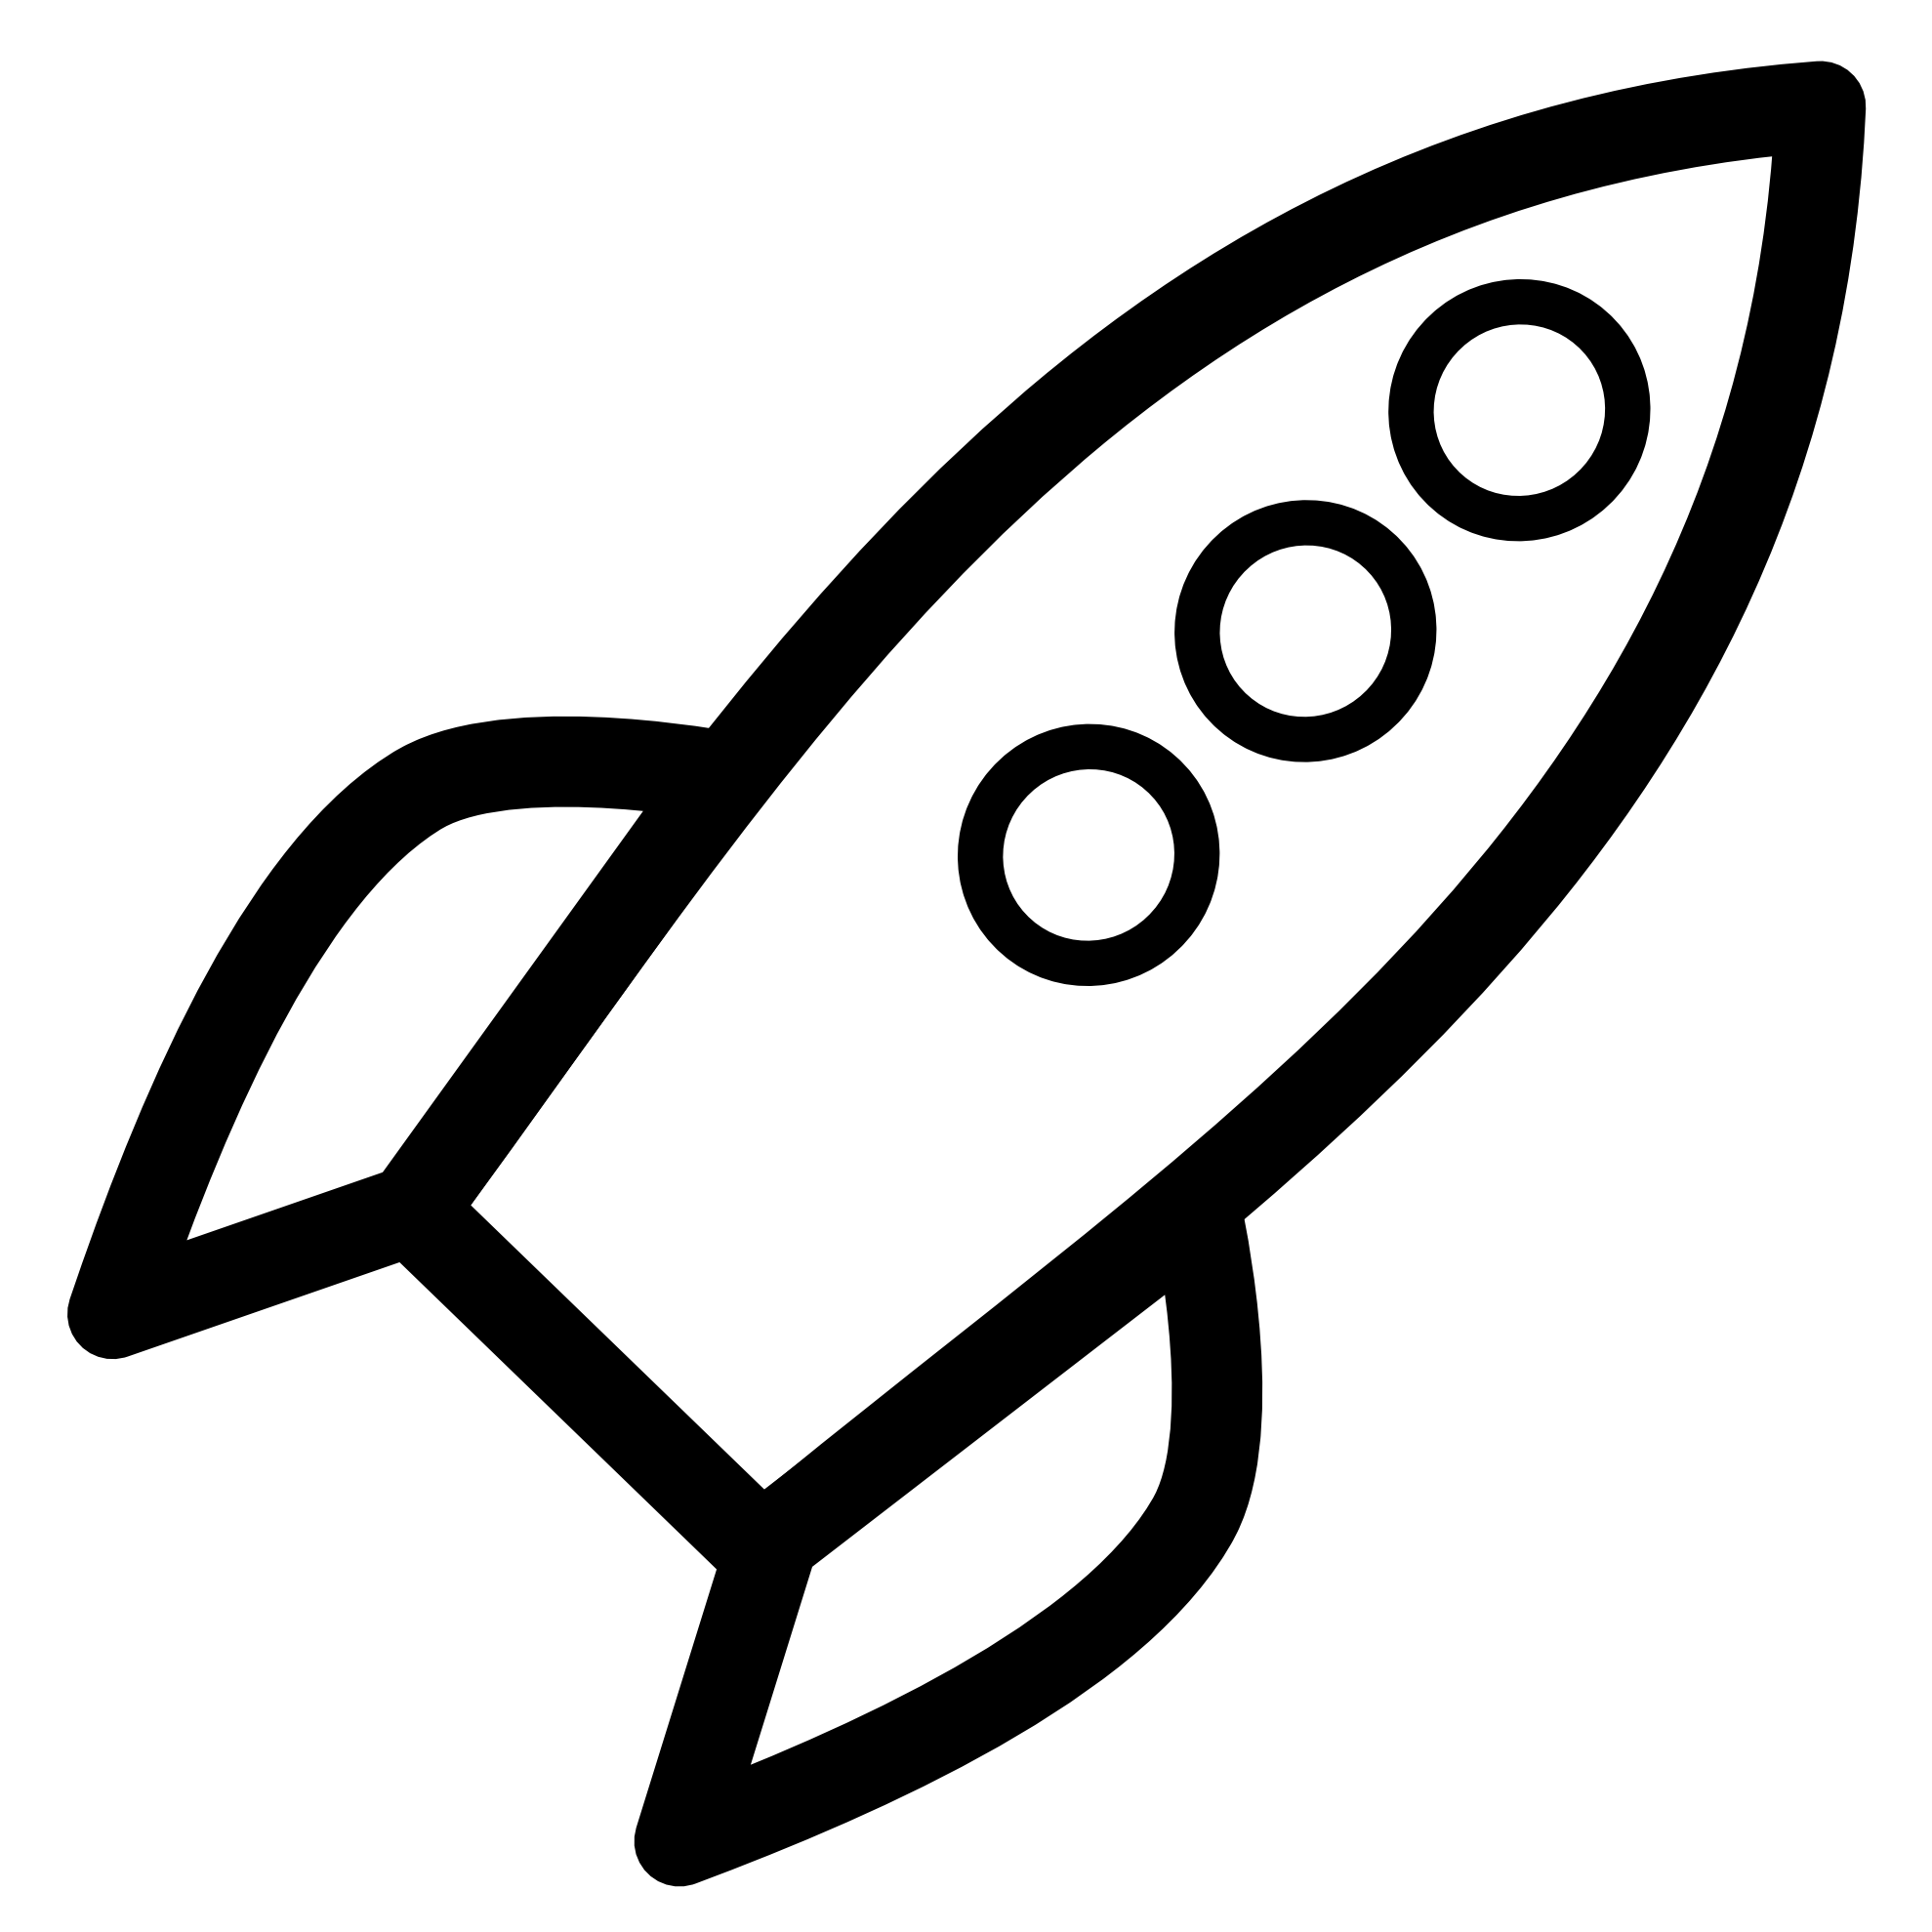 Clipart rocket black and white. Rocketship ship clipartbarn download